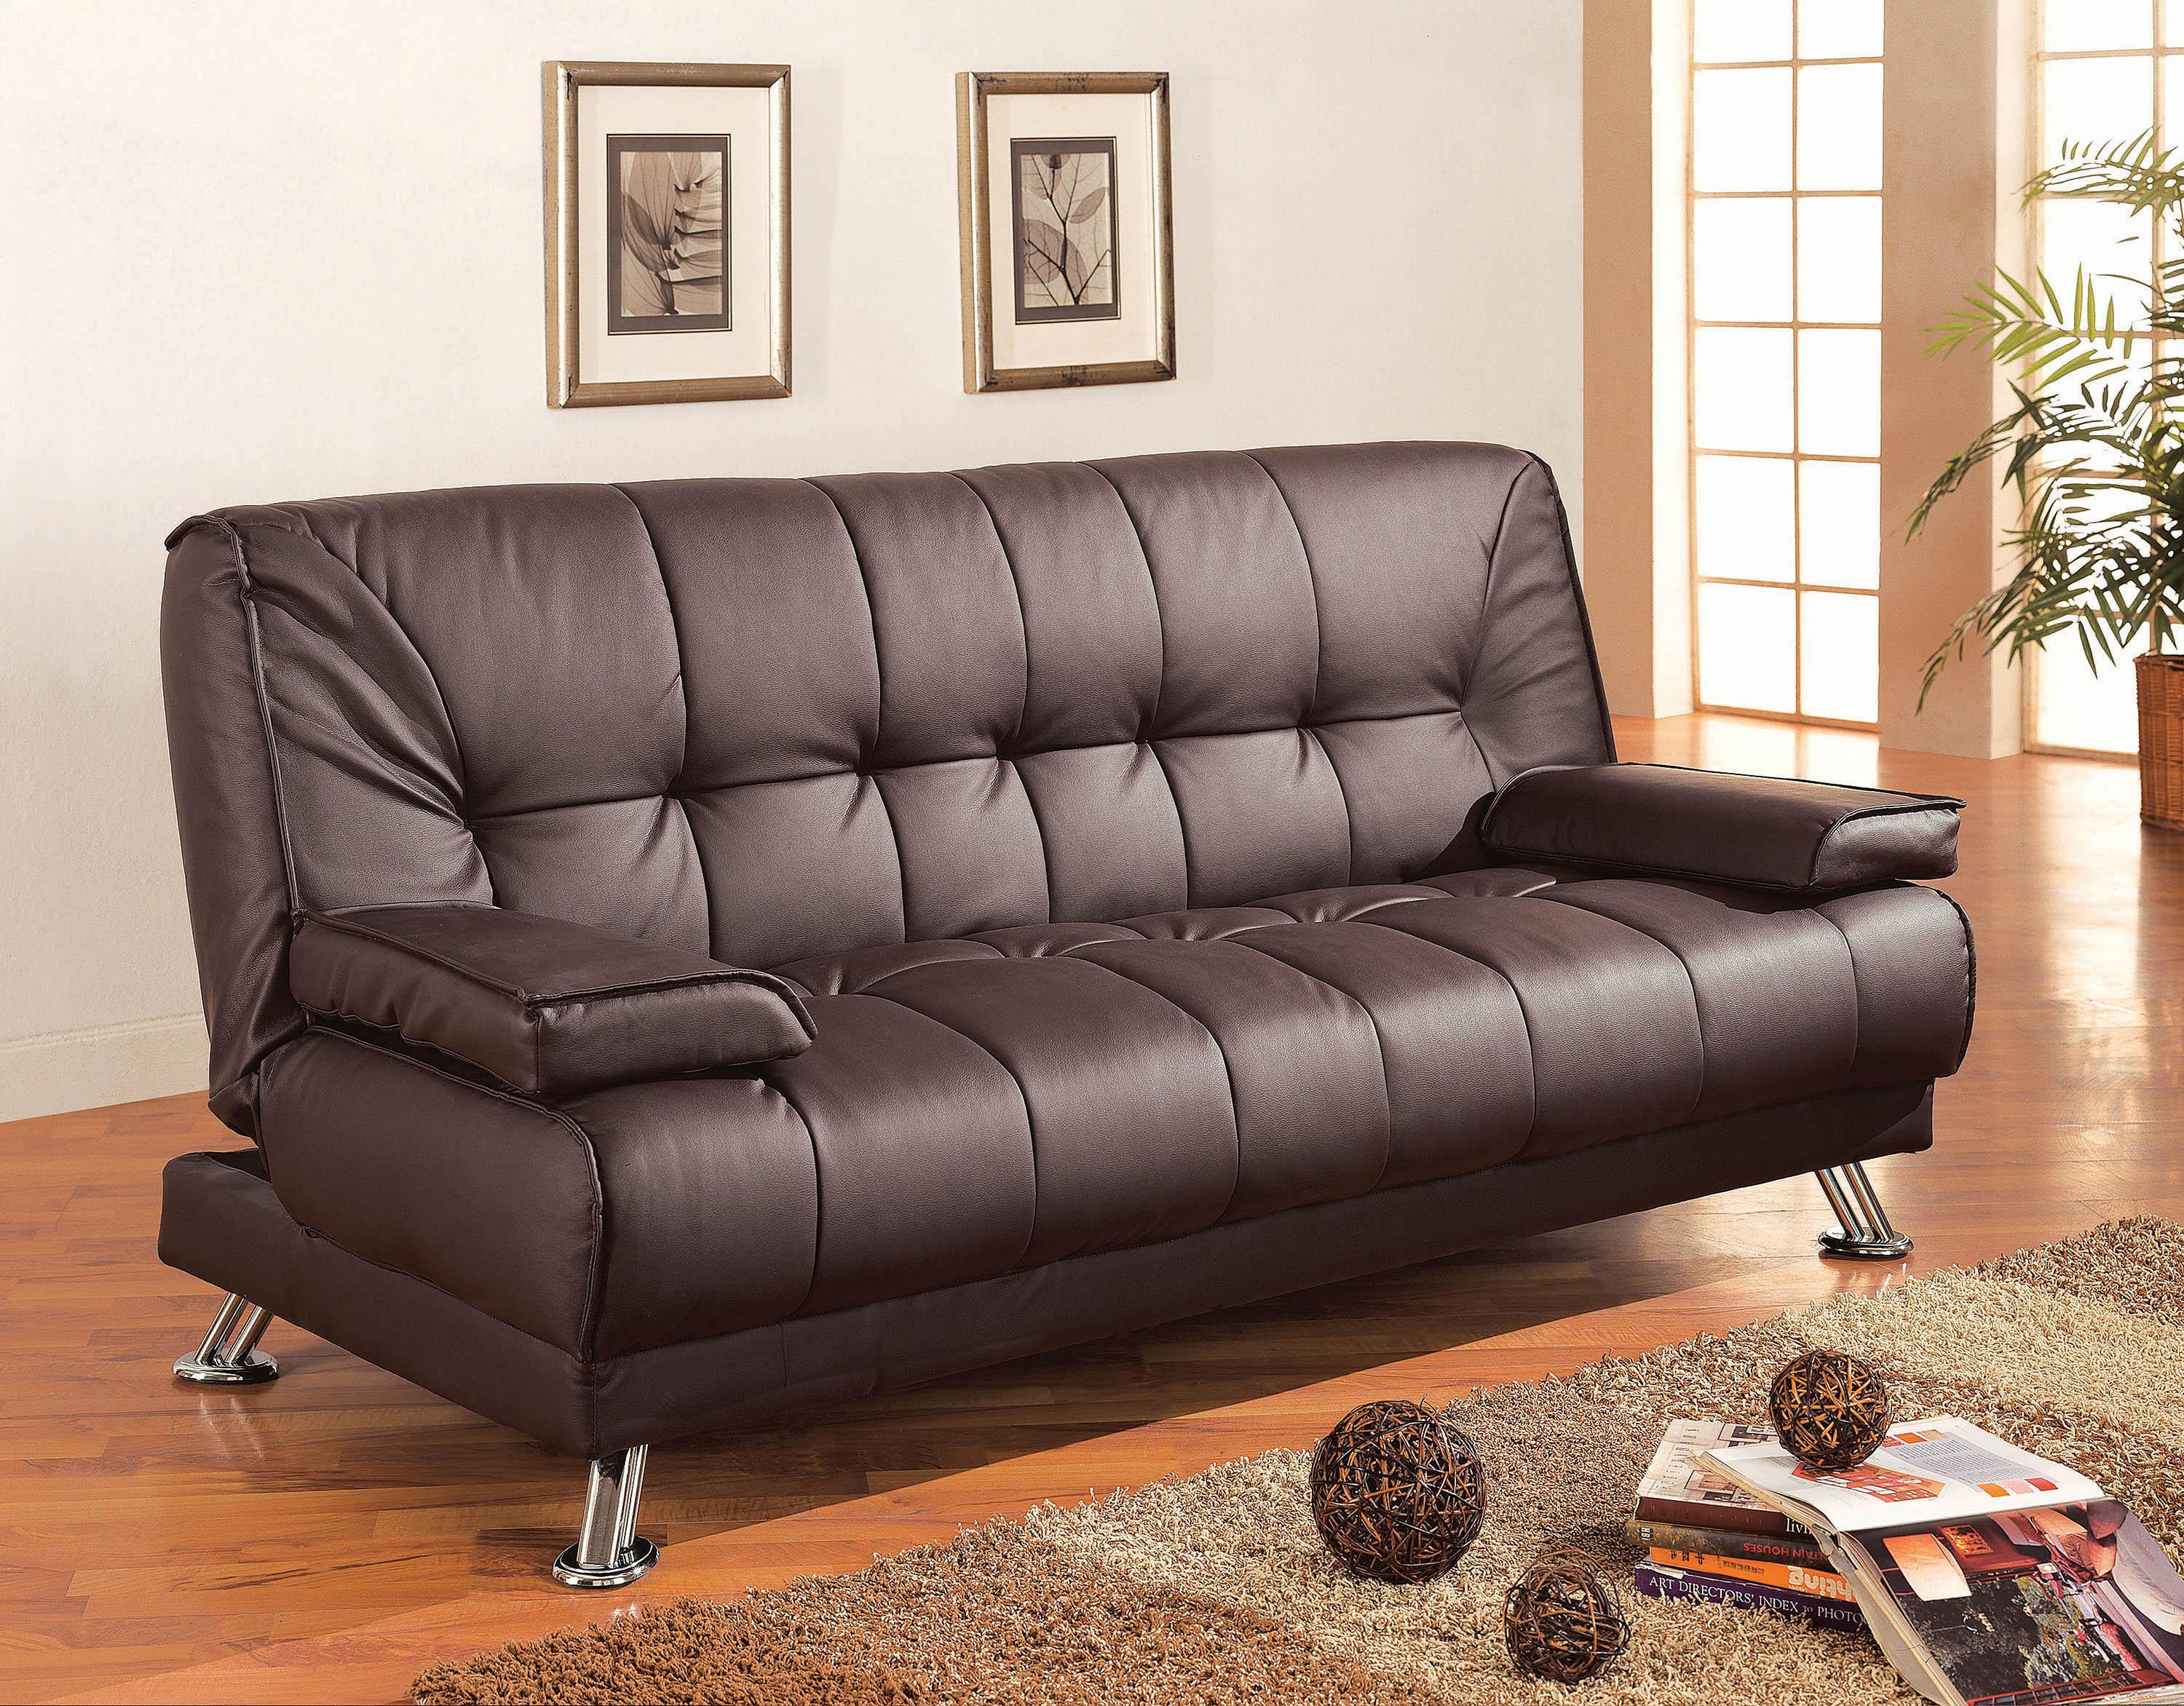 Transitional Sofa bed 300148 Pierre 300148 in Brown Leatherette